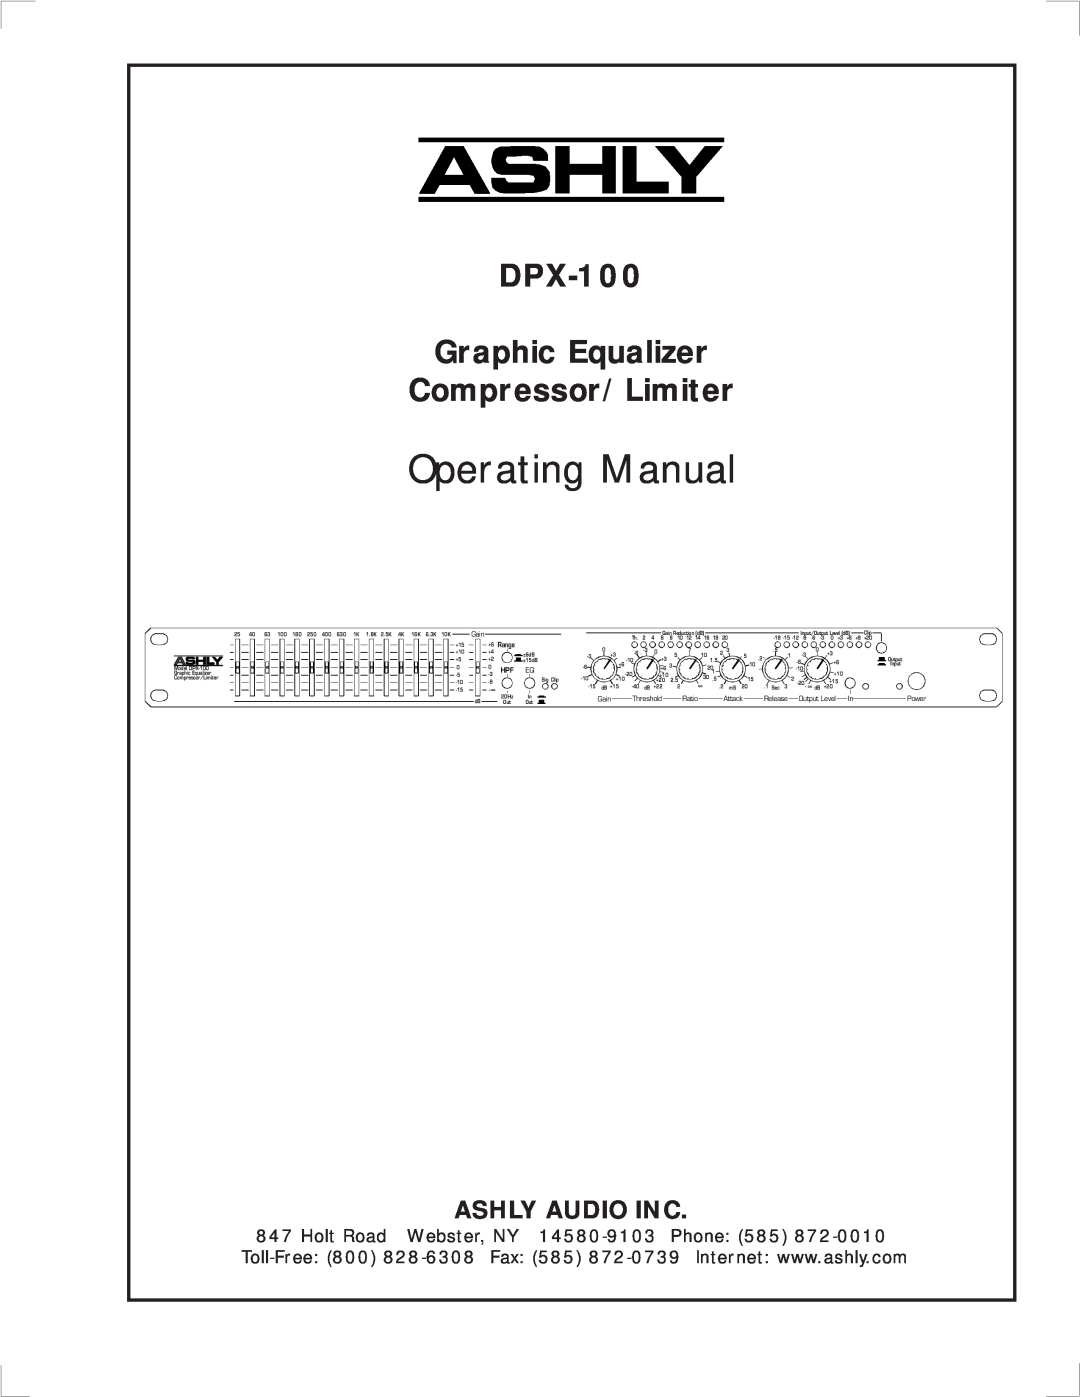 Ashly manual DPX-100 Graphic Equalizer Compressor/Limiter, Operating Manual, Ashly Audio Inc 